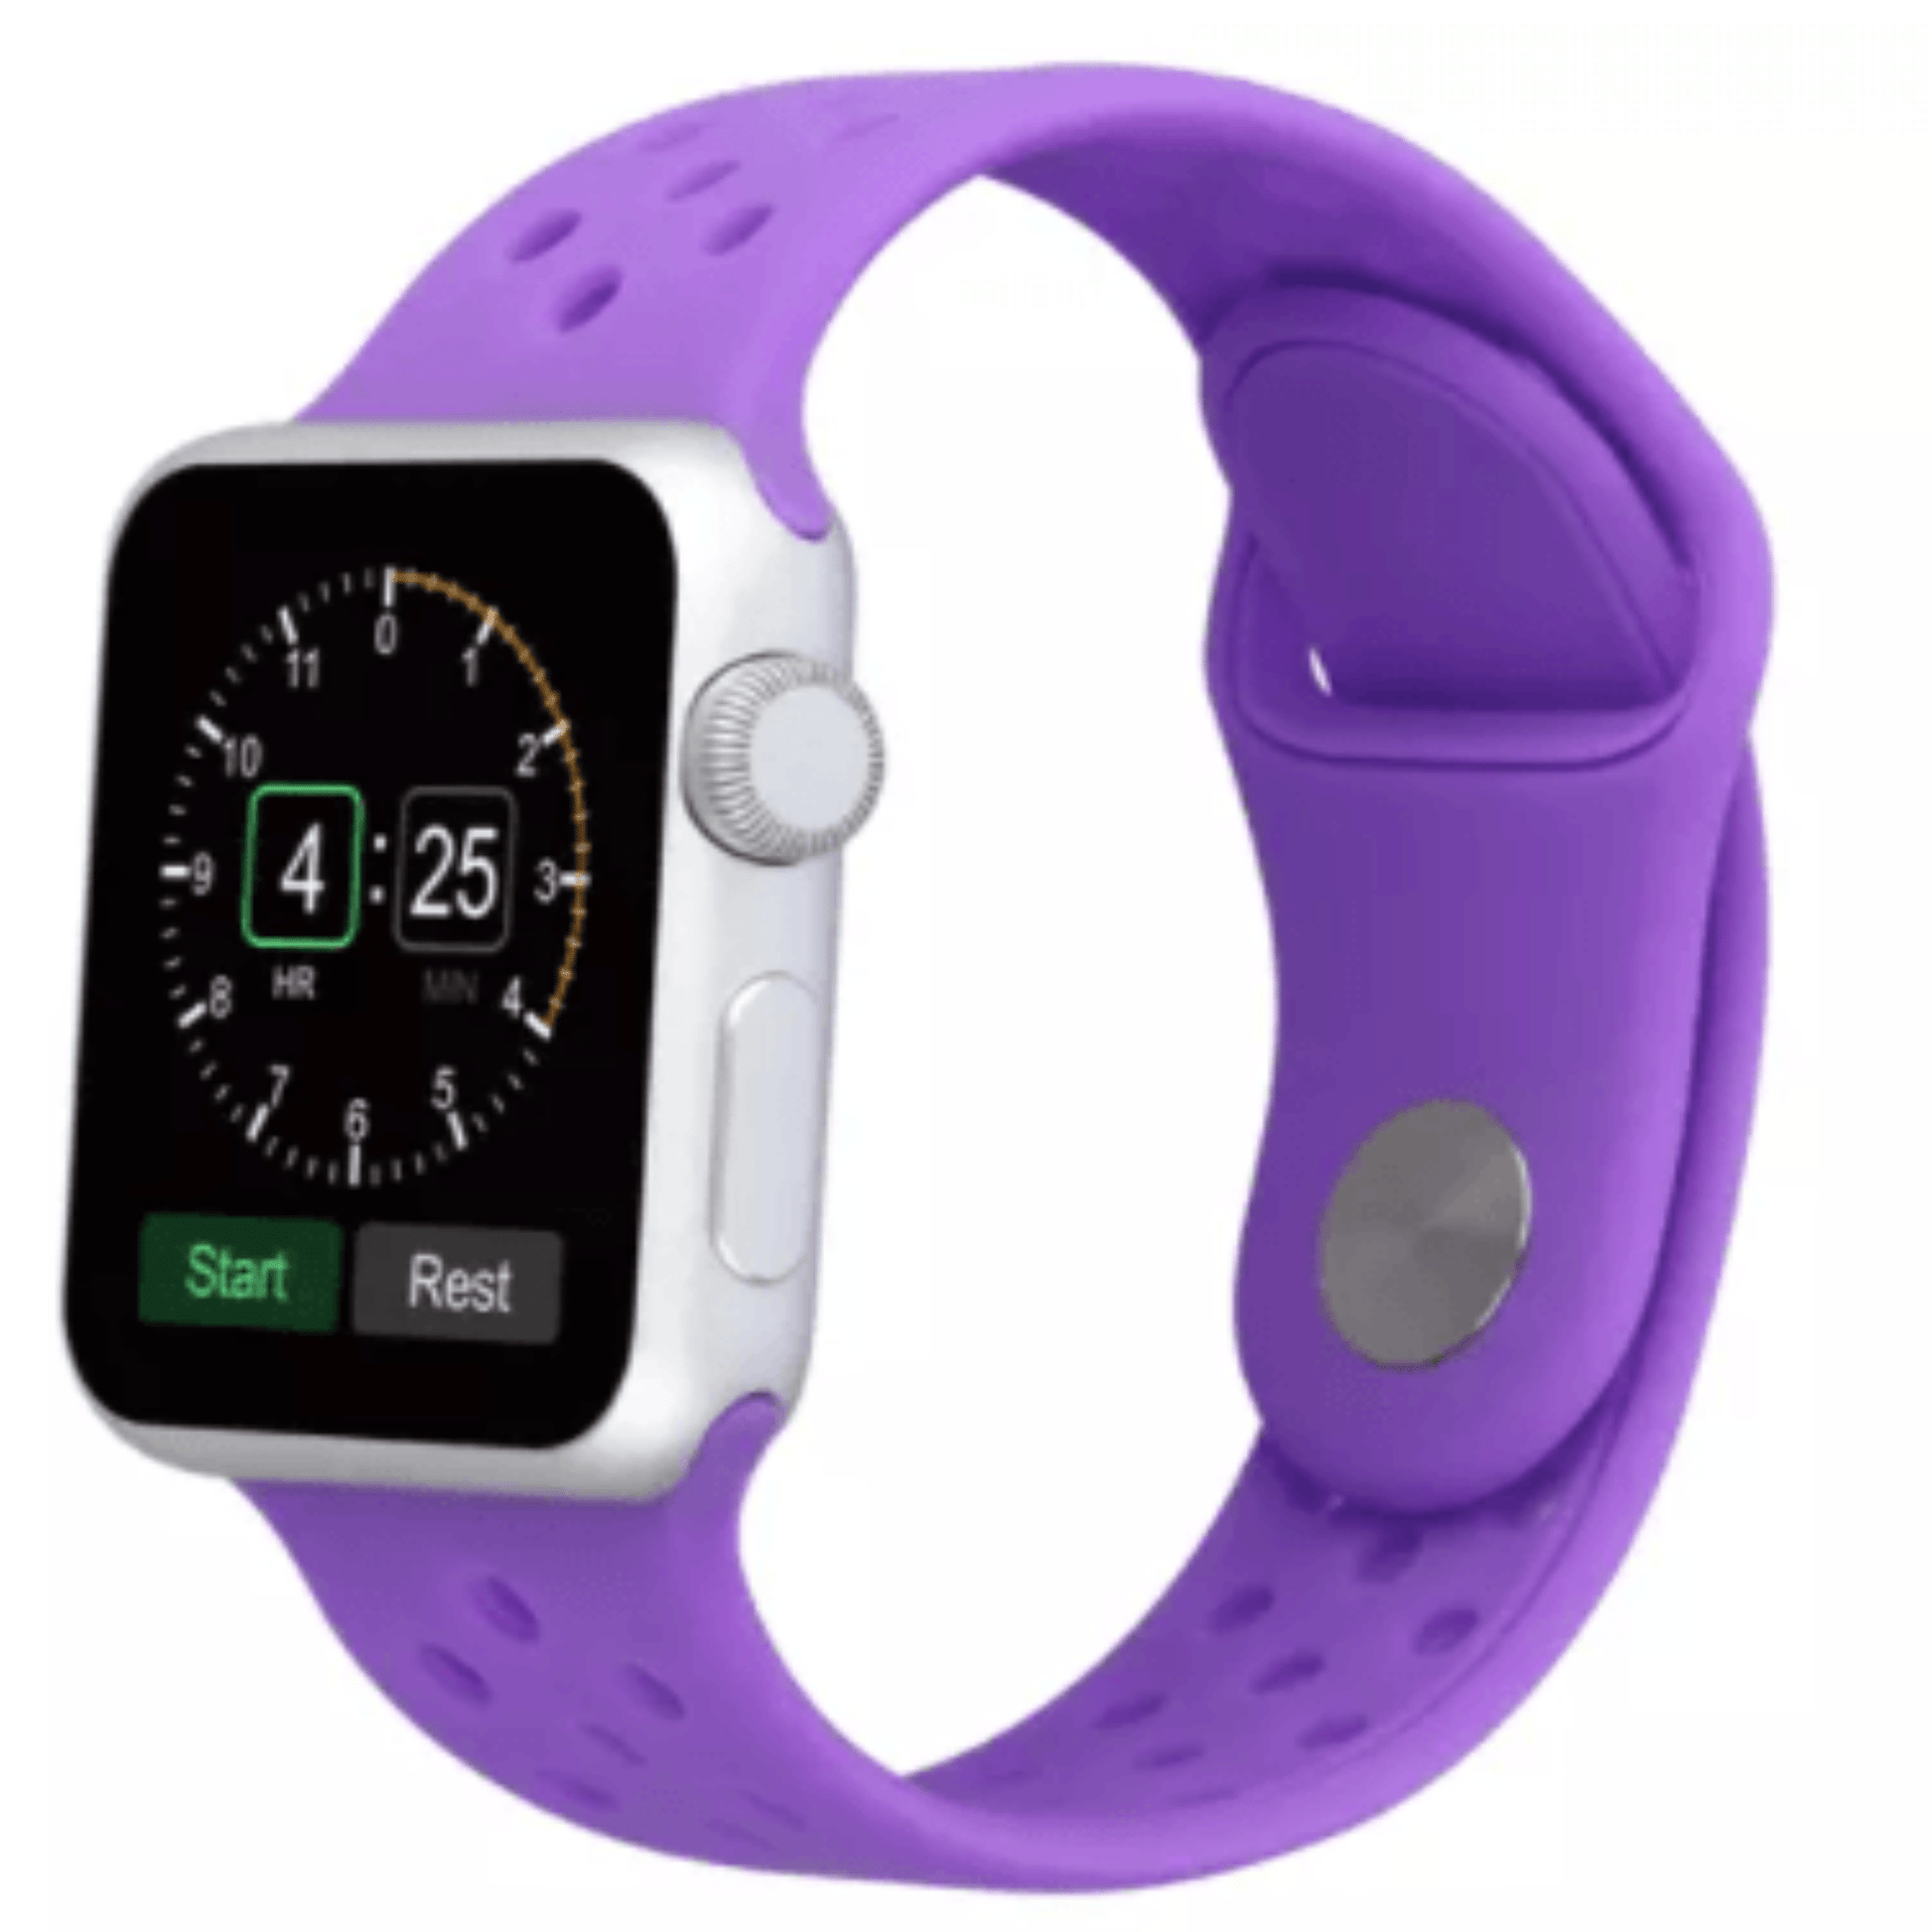 Breathable Silicone Sport Replacement Band for Apple Watch Purple Apple Watch Band Elements Watches